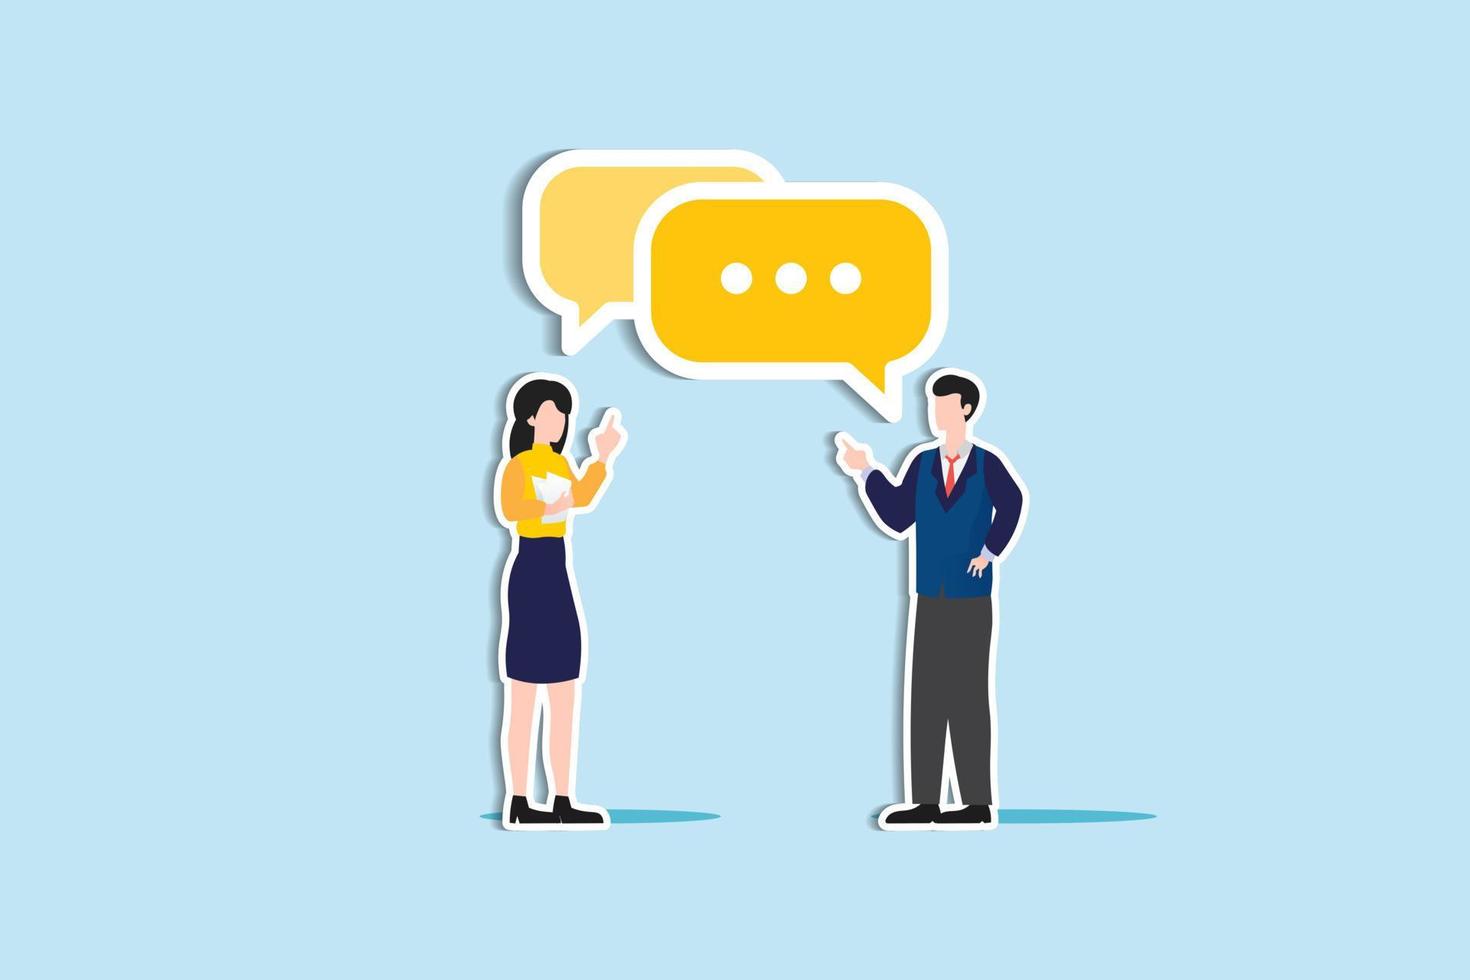 Communicate idea in business discussion, effective communication to brainstorm and come up with solution or result concept, businessman and woman coworker talking with speech bubble. paper cut style vector